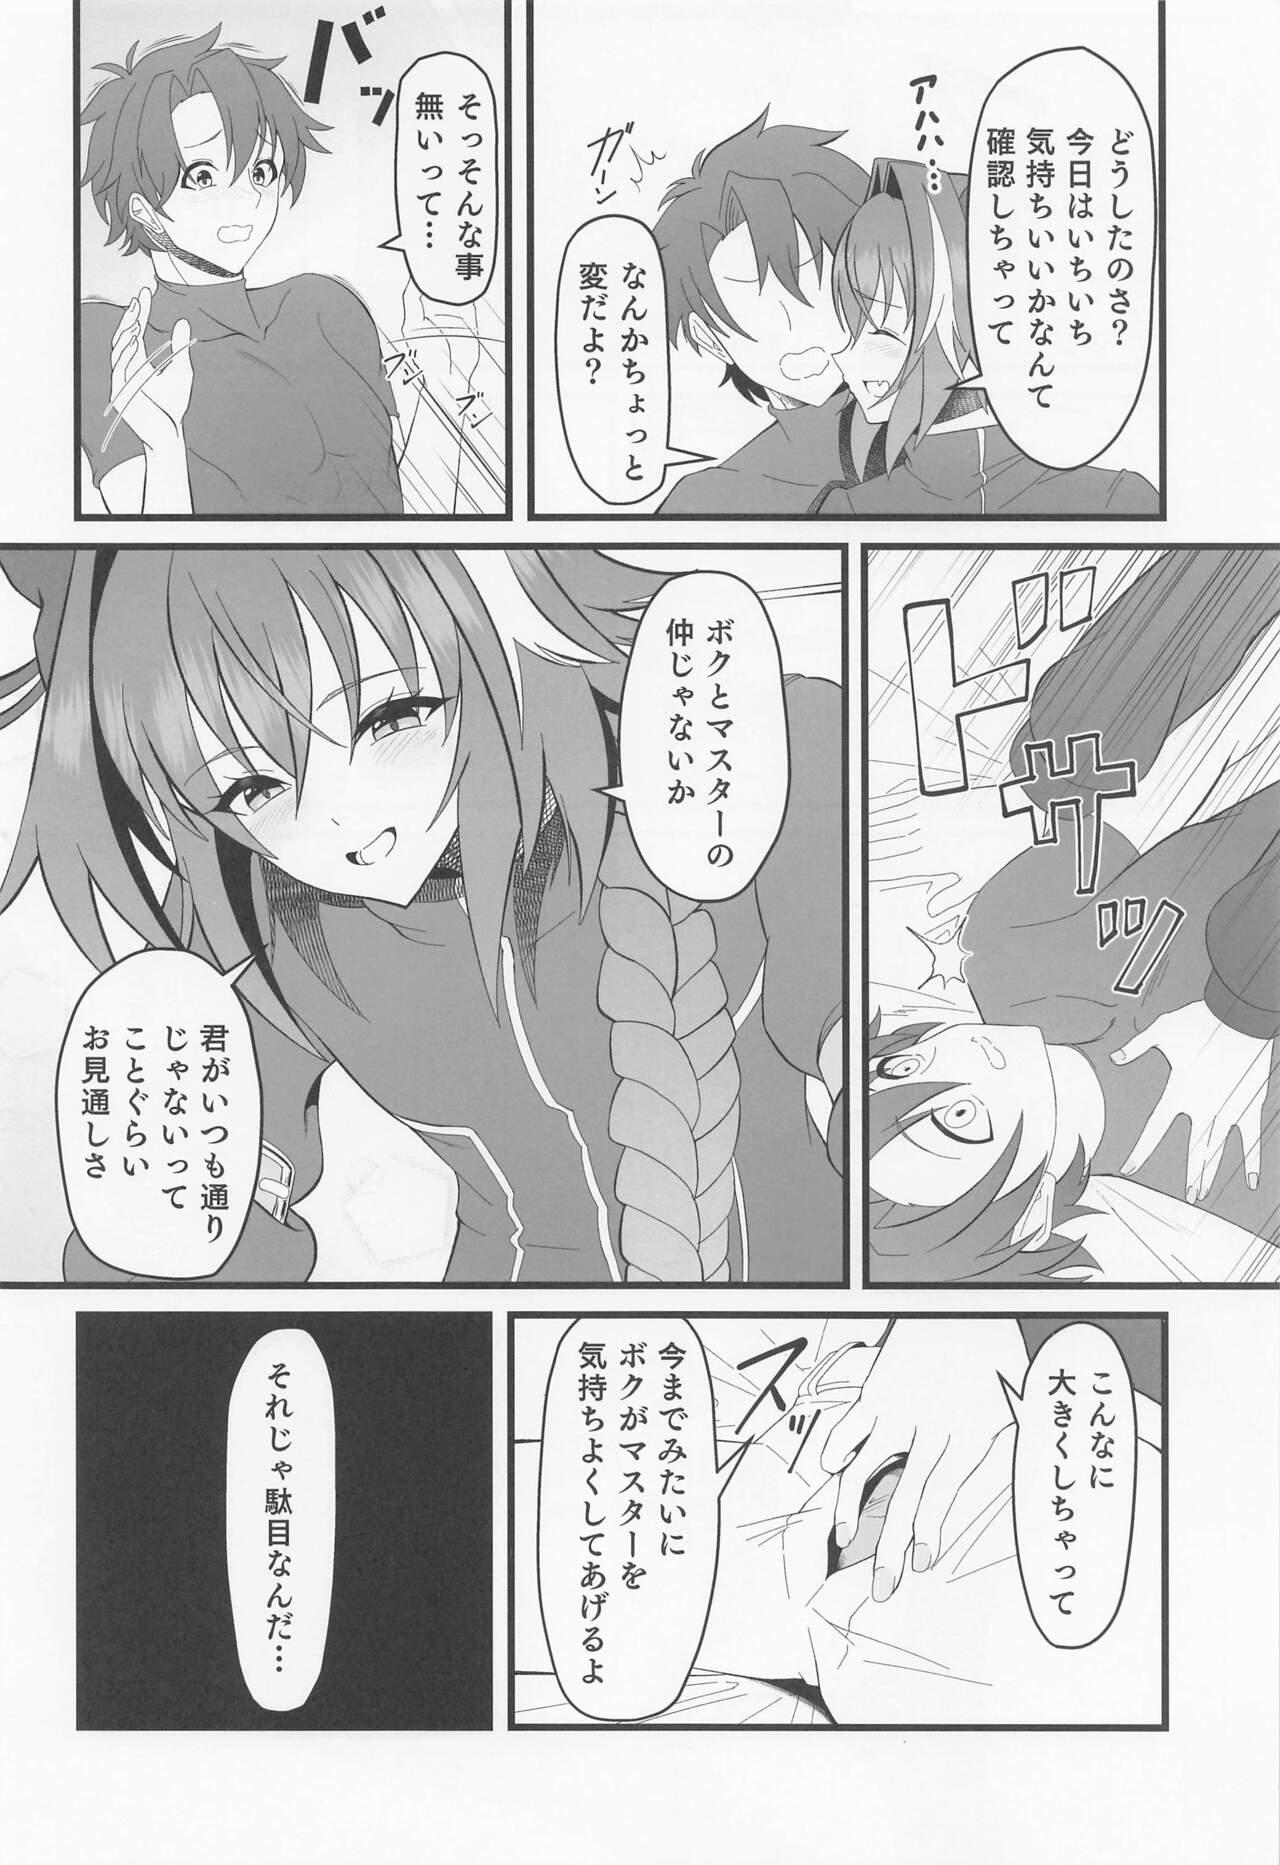 Arabe Kimi no Ichiban ni Naritakute - I wanted to be your number one. - Fate grand order Pigtails - Page 7